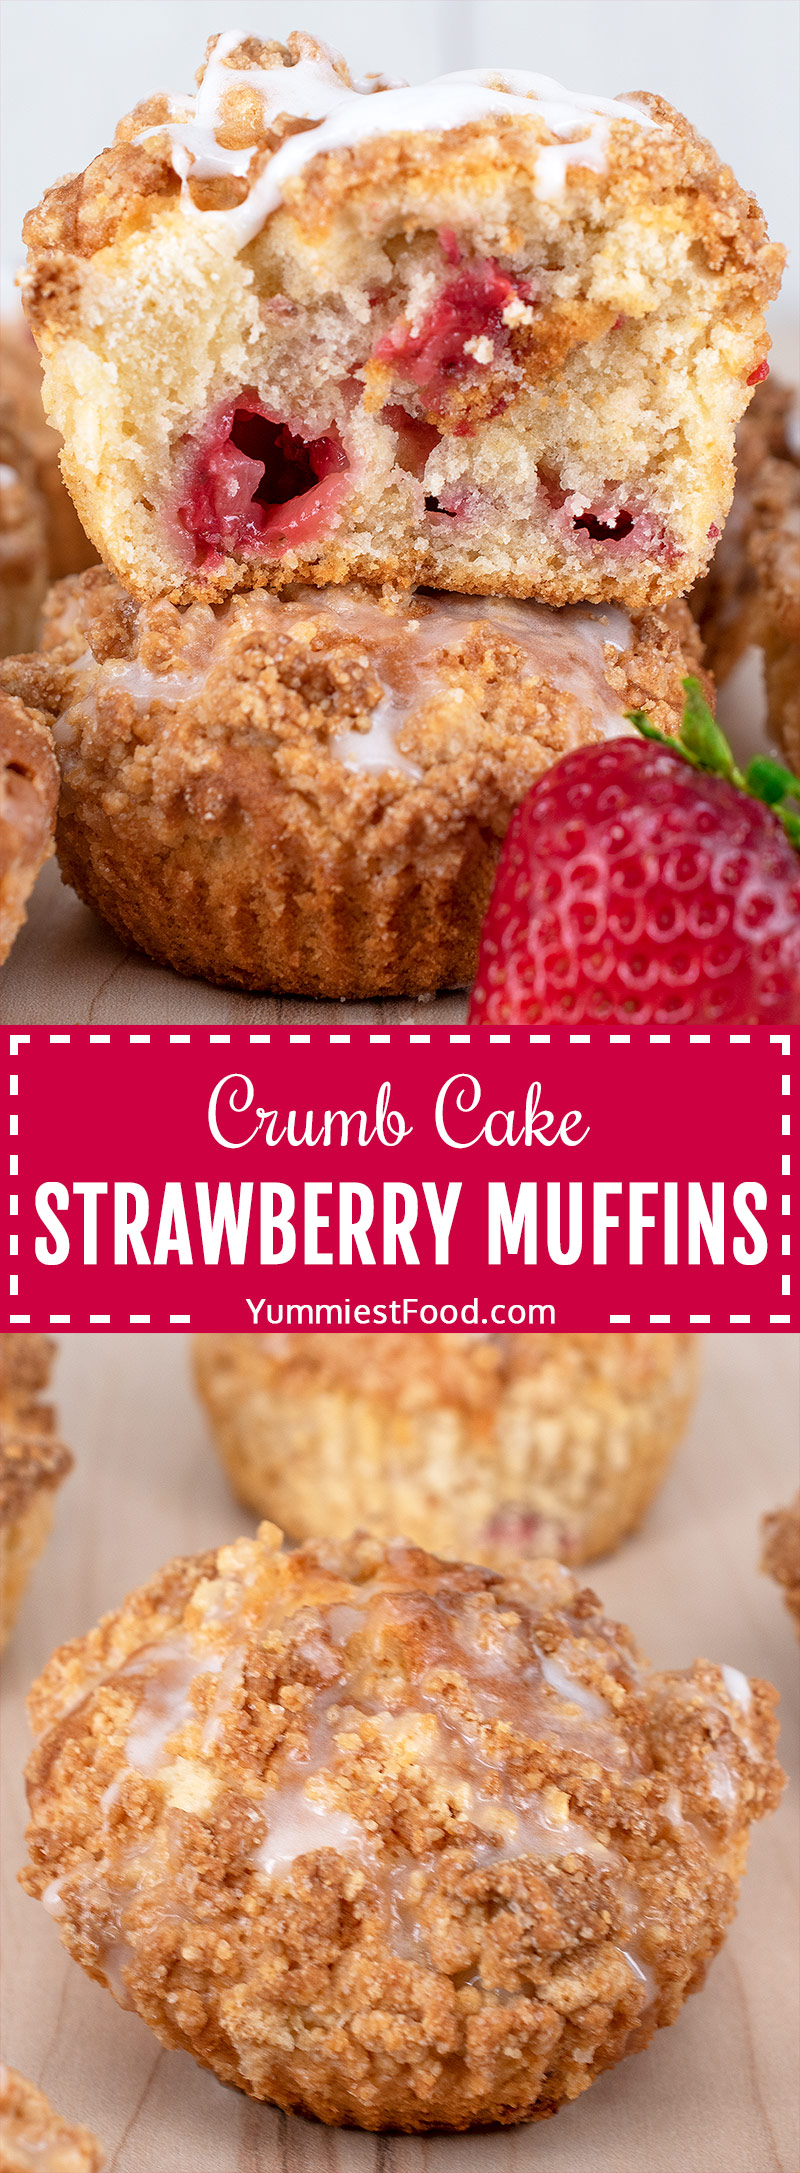 Crumb Cake Strawberry Muffins filled with freshly chopped strawberries that go really well together with the buttery crumble topping and the sweetness of the drizzle.